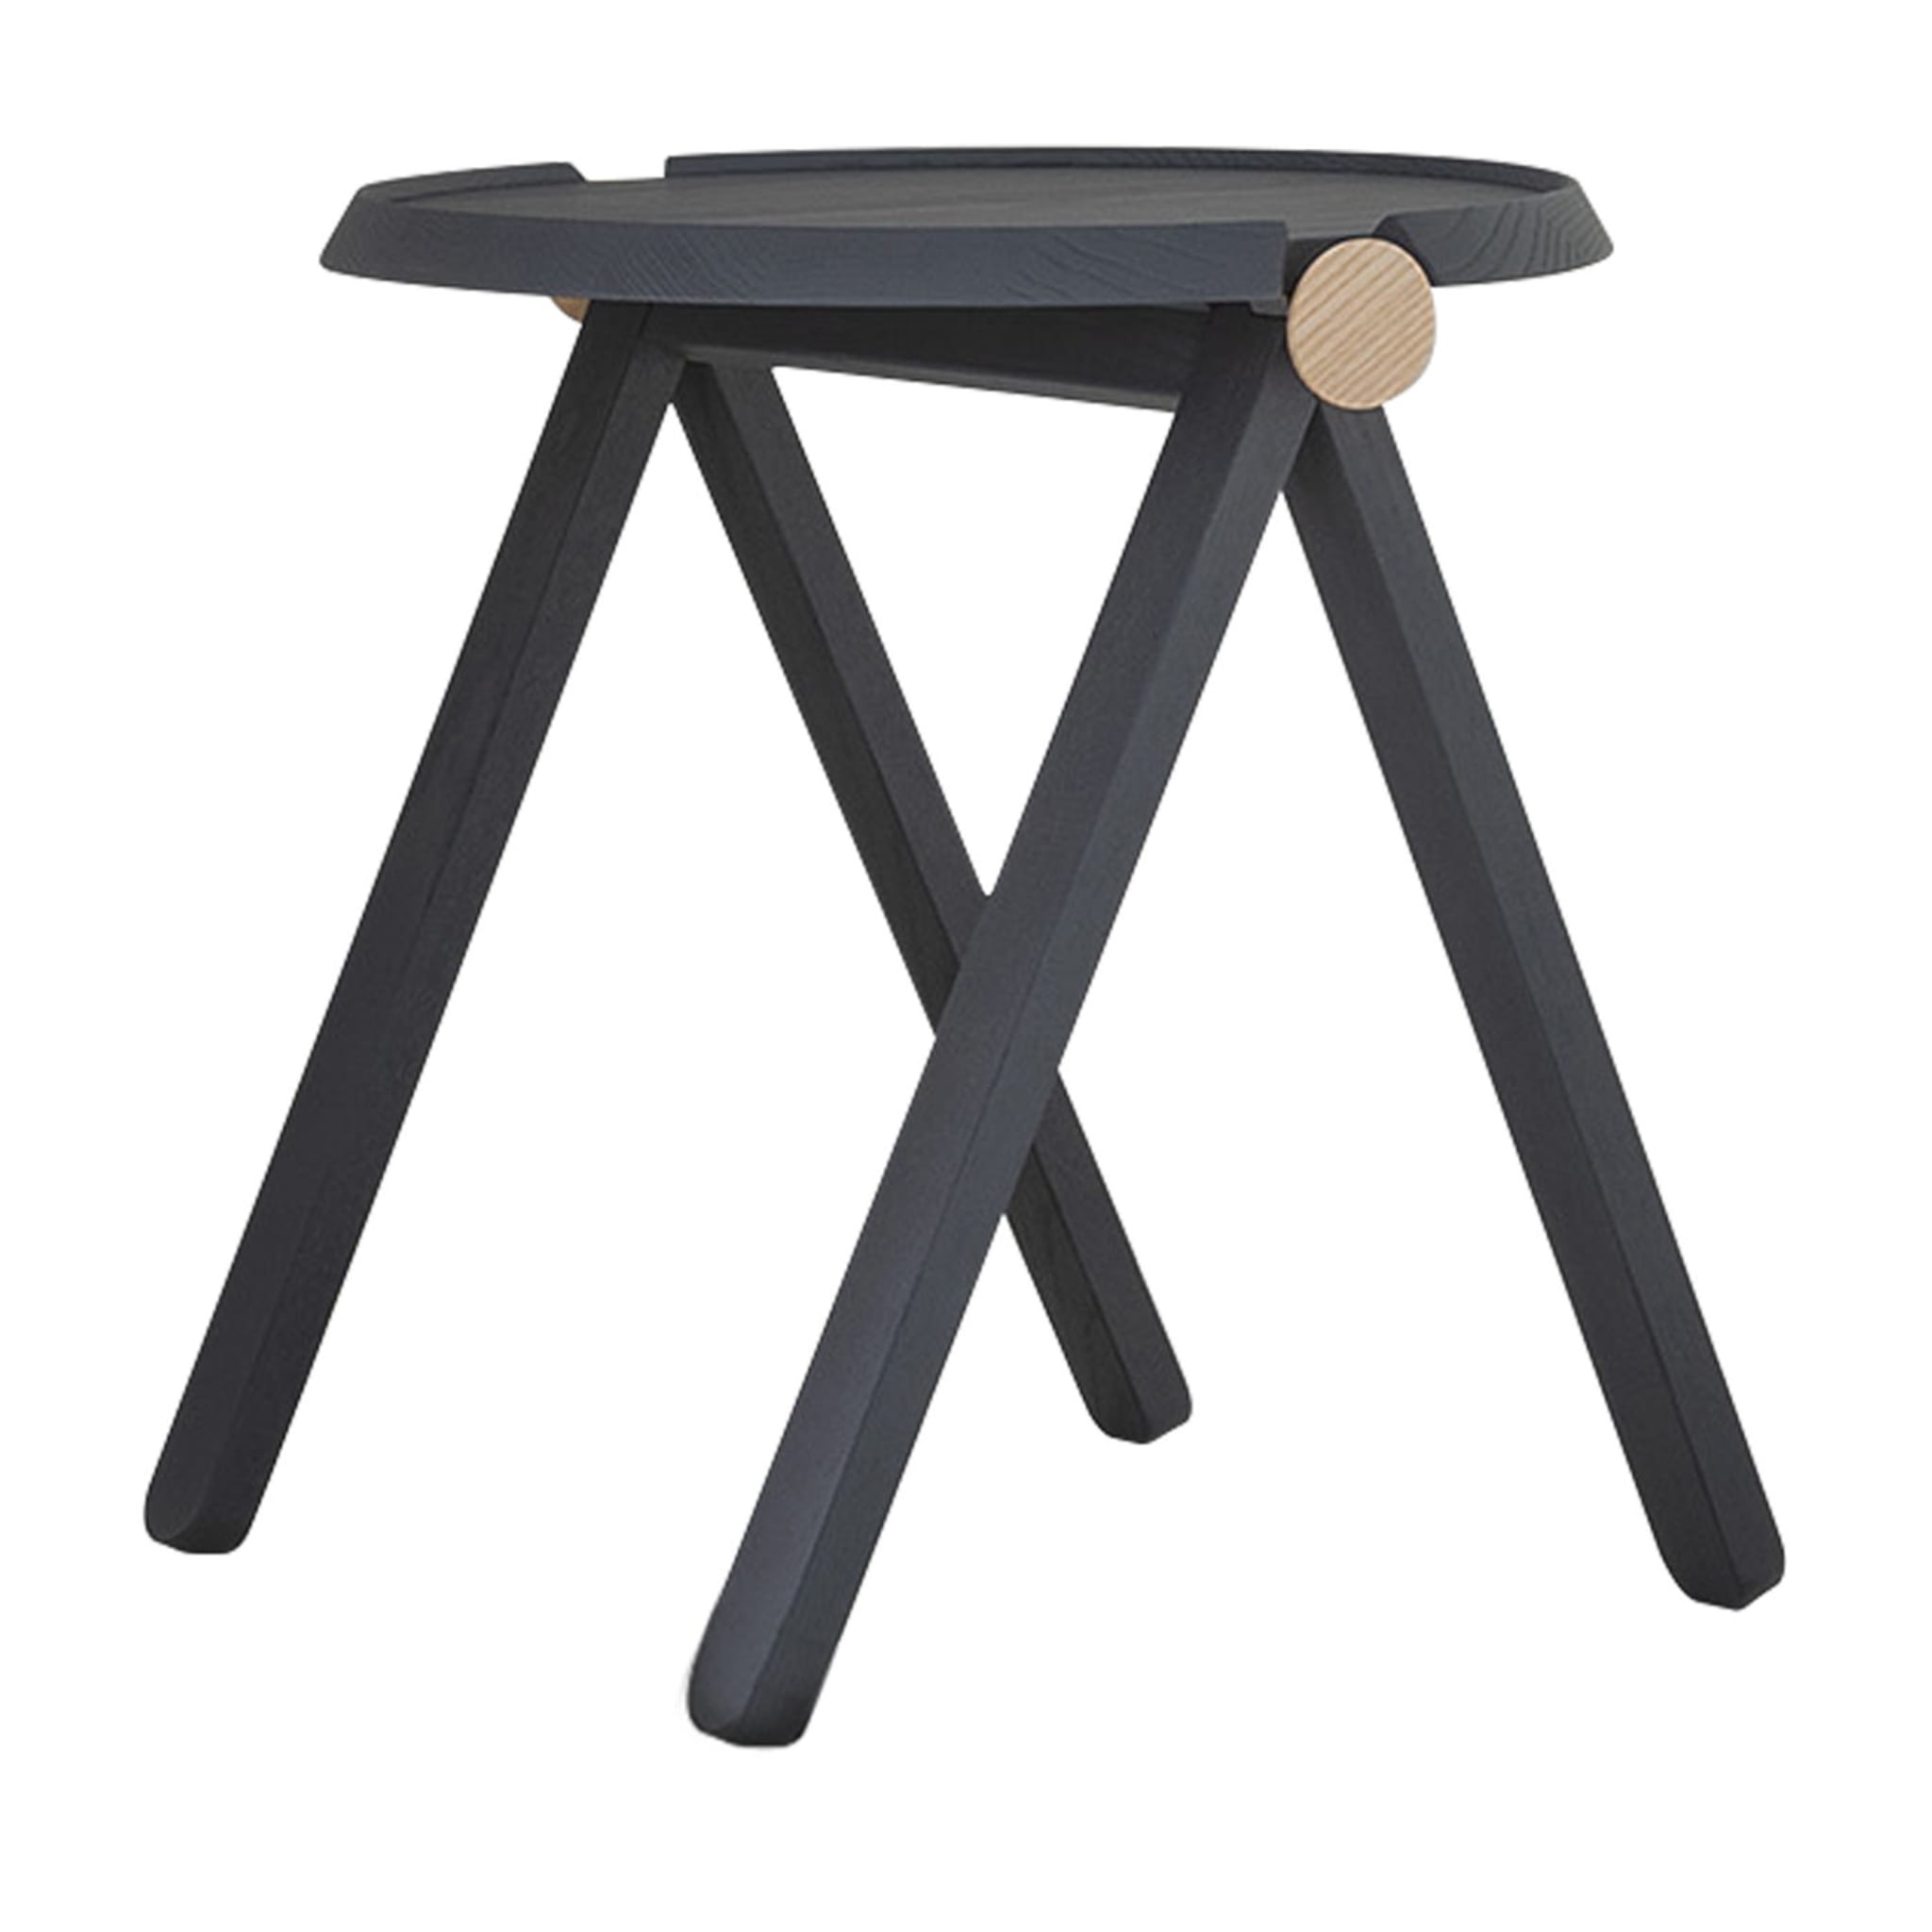 Lilliput 312 Gray Side Table by Studioventotto - Main view